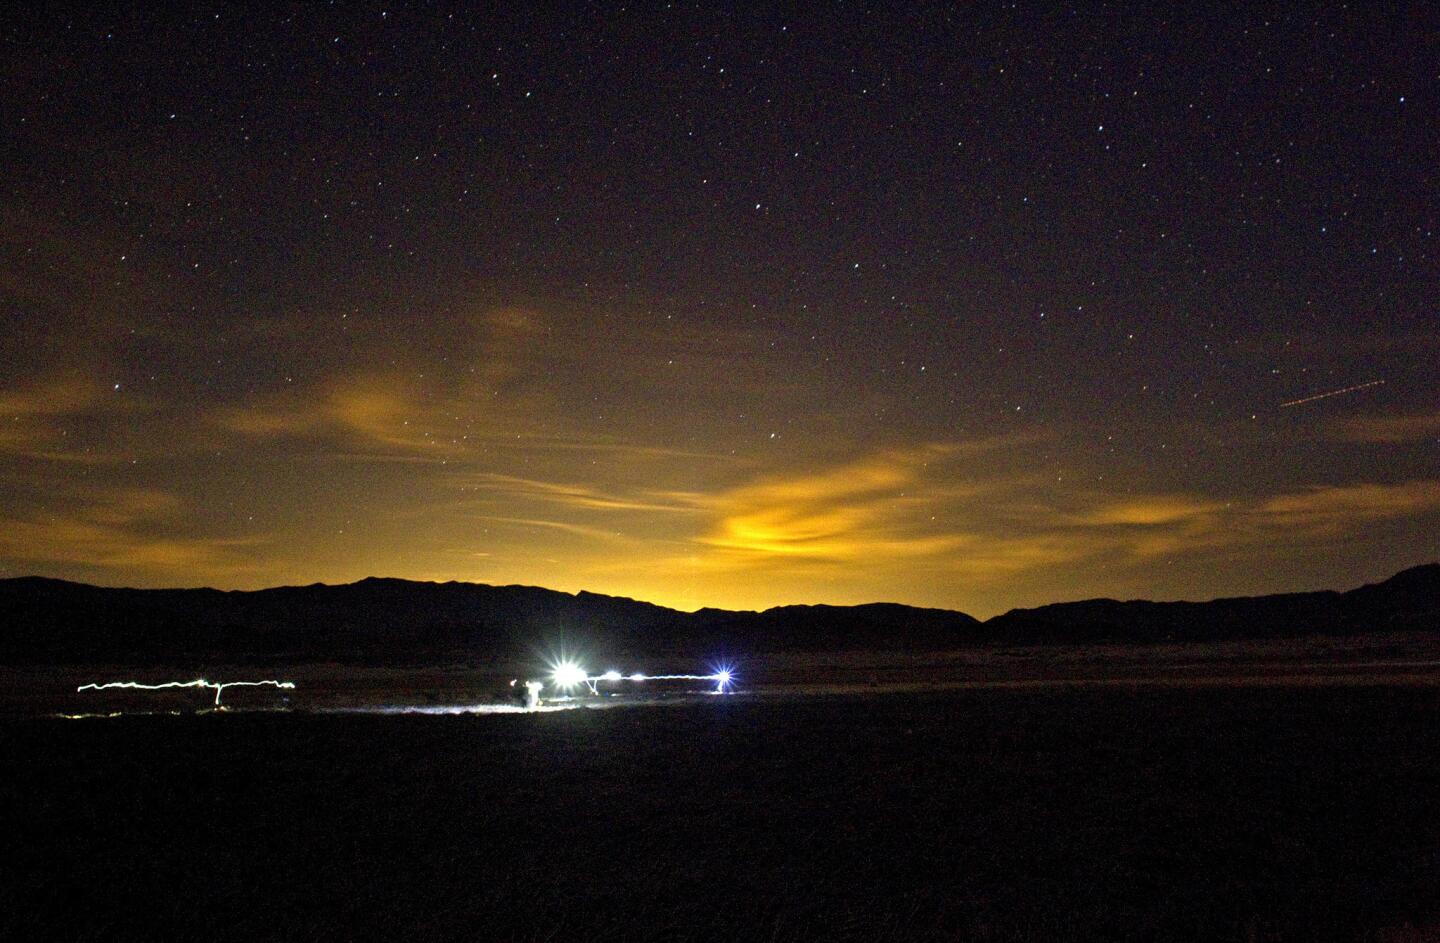 Under gleaming stars, Janet Foley, an epidemiology professor at UC Davis' School of Veterinary Medicine, leads a team of scientists wearing headlamps through the marshlands of the Mojave Desert to check live traps set to catch the Amargosa vole.